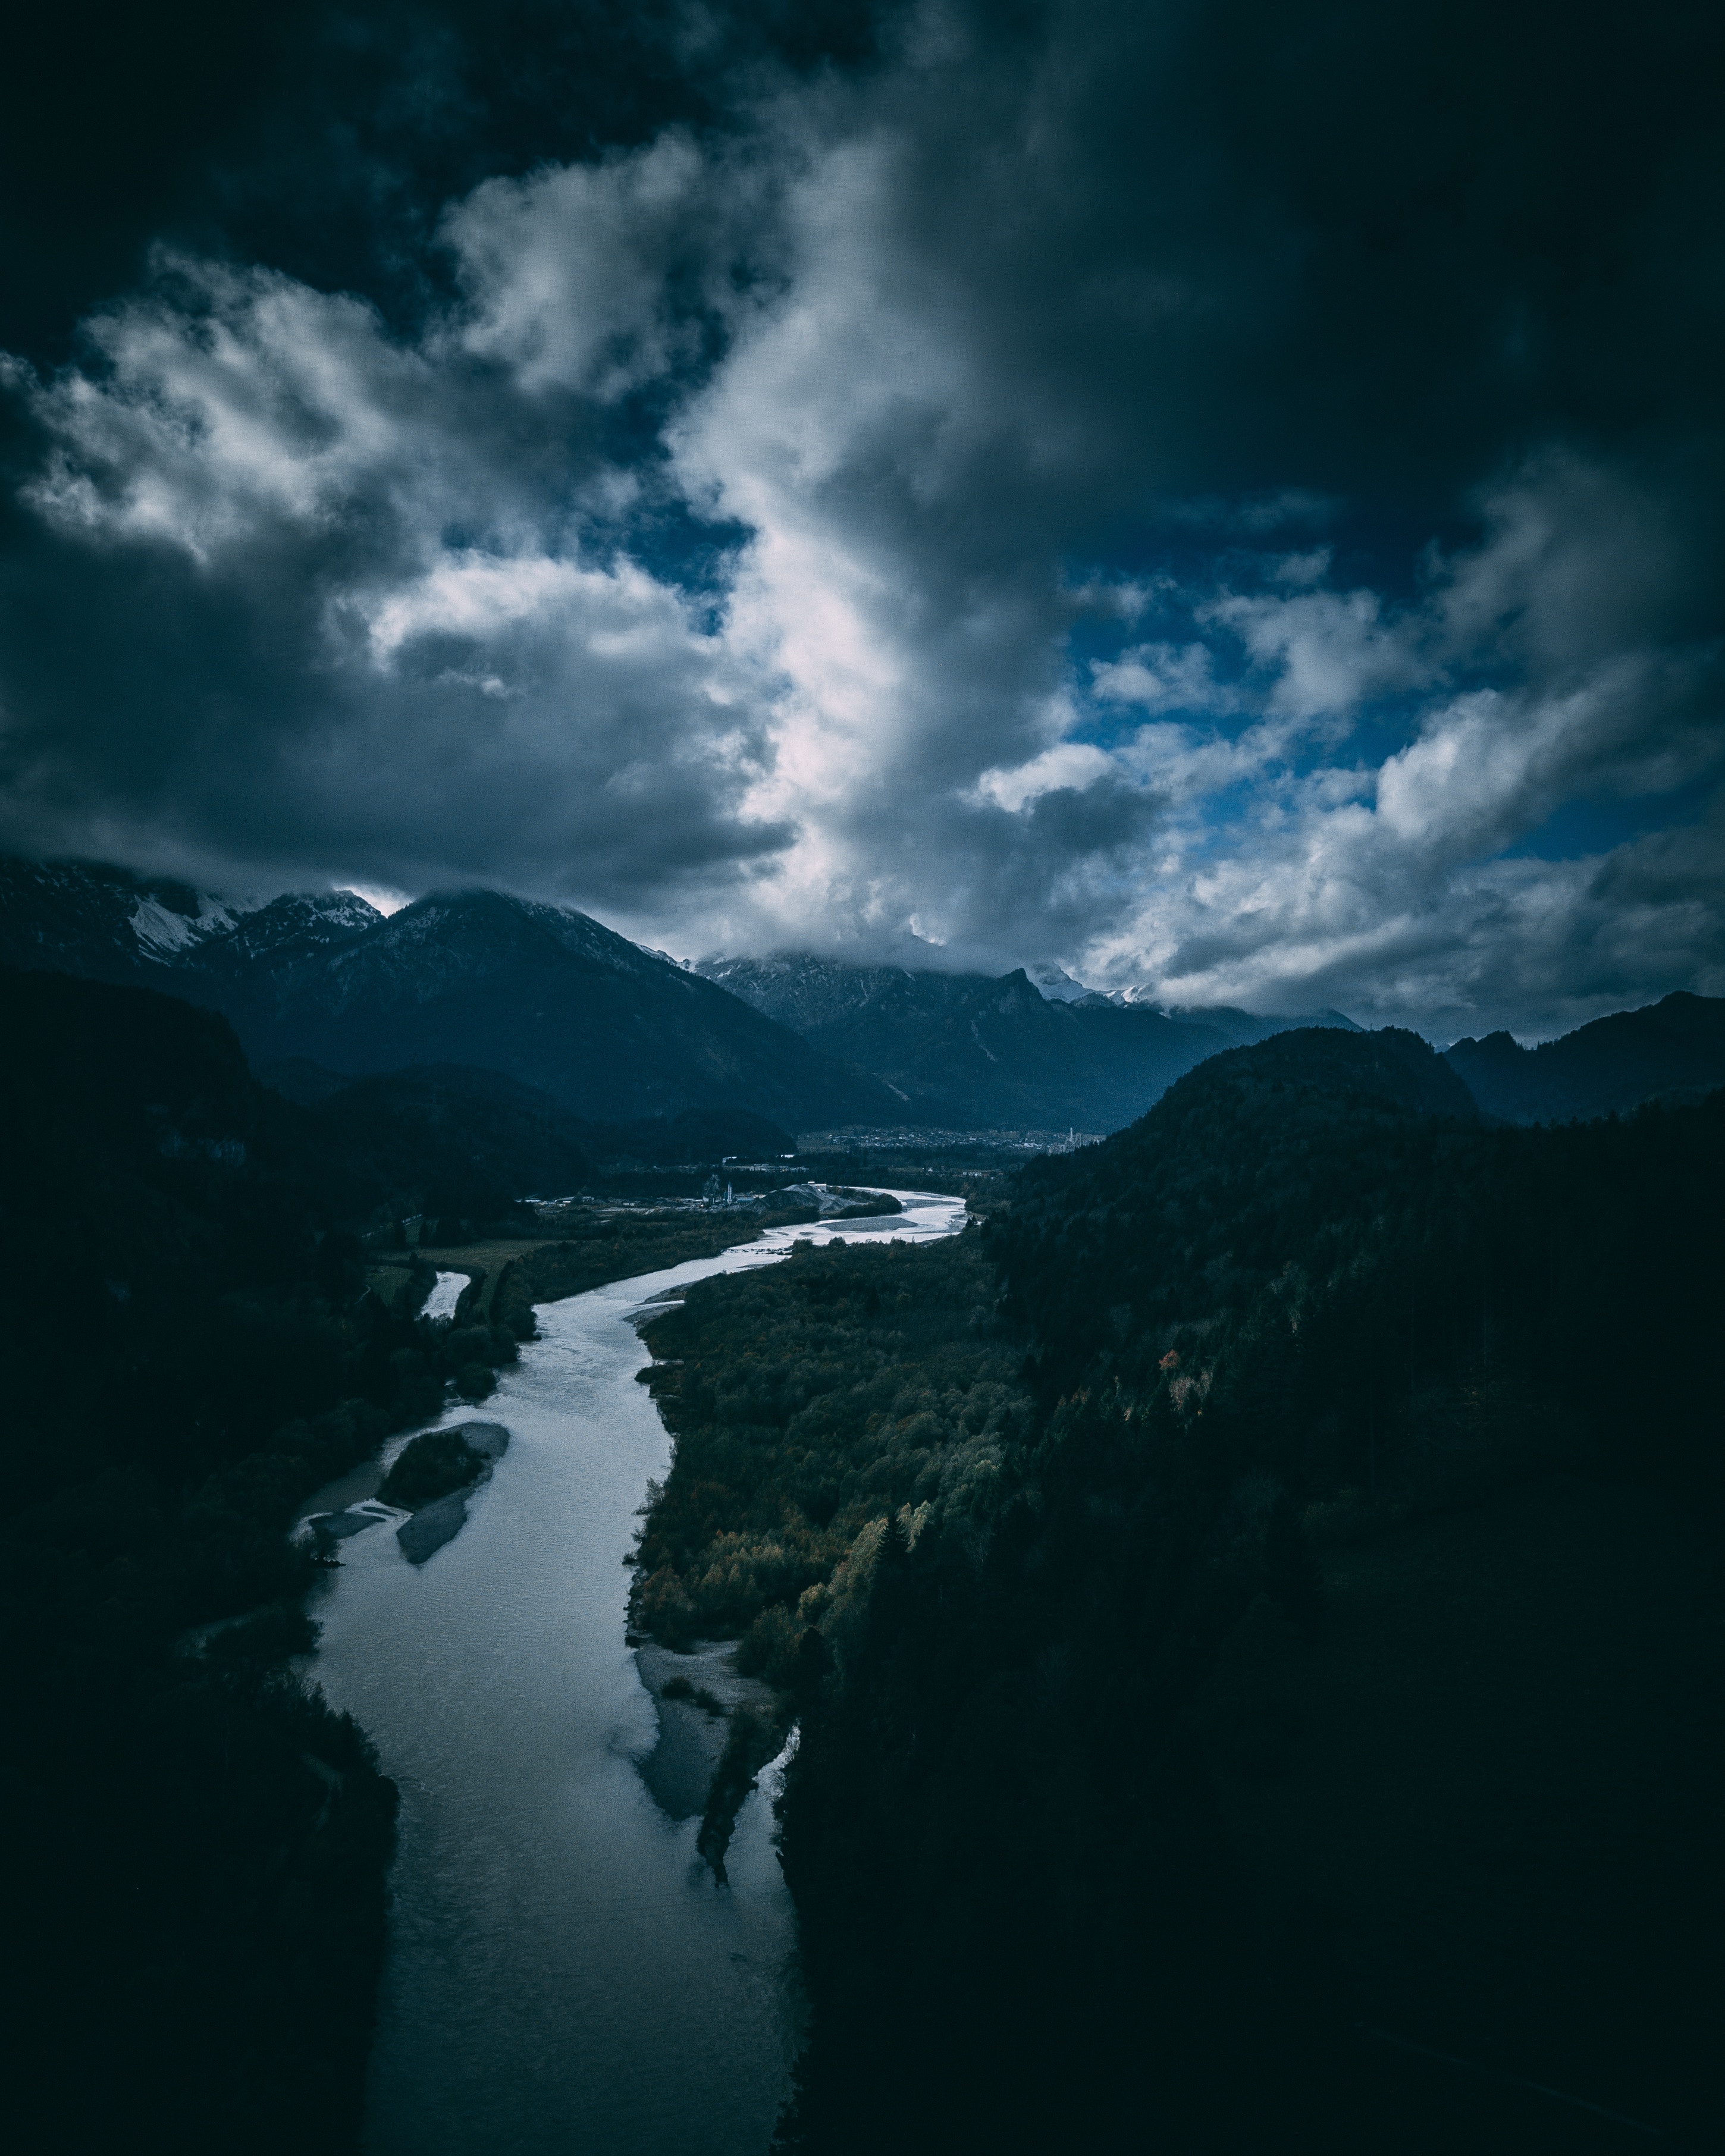 germany, trees, clouds, sky, nature, rivers, mountains, view from above wallpaper for mobile